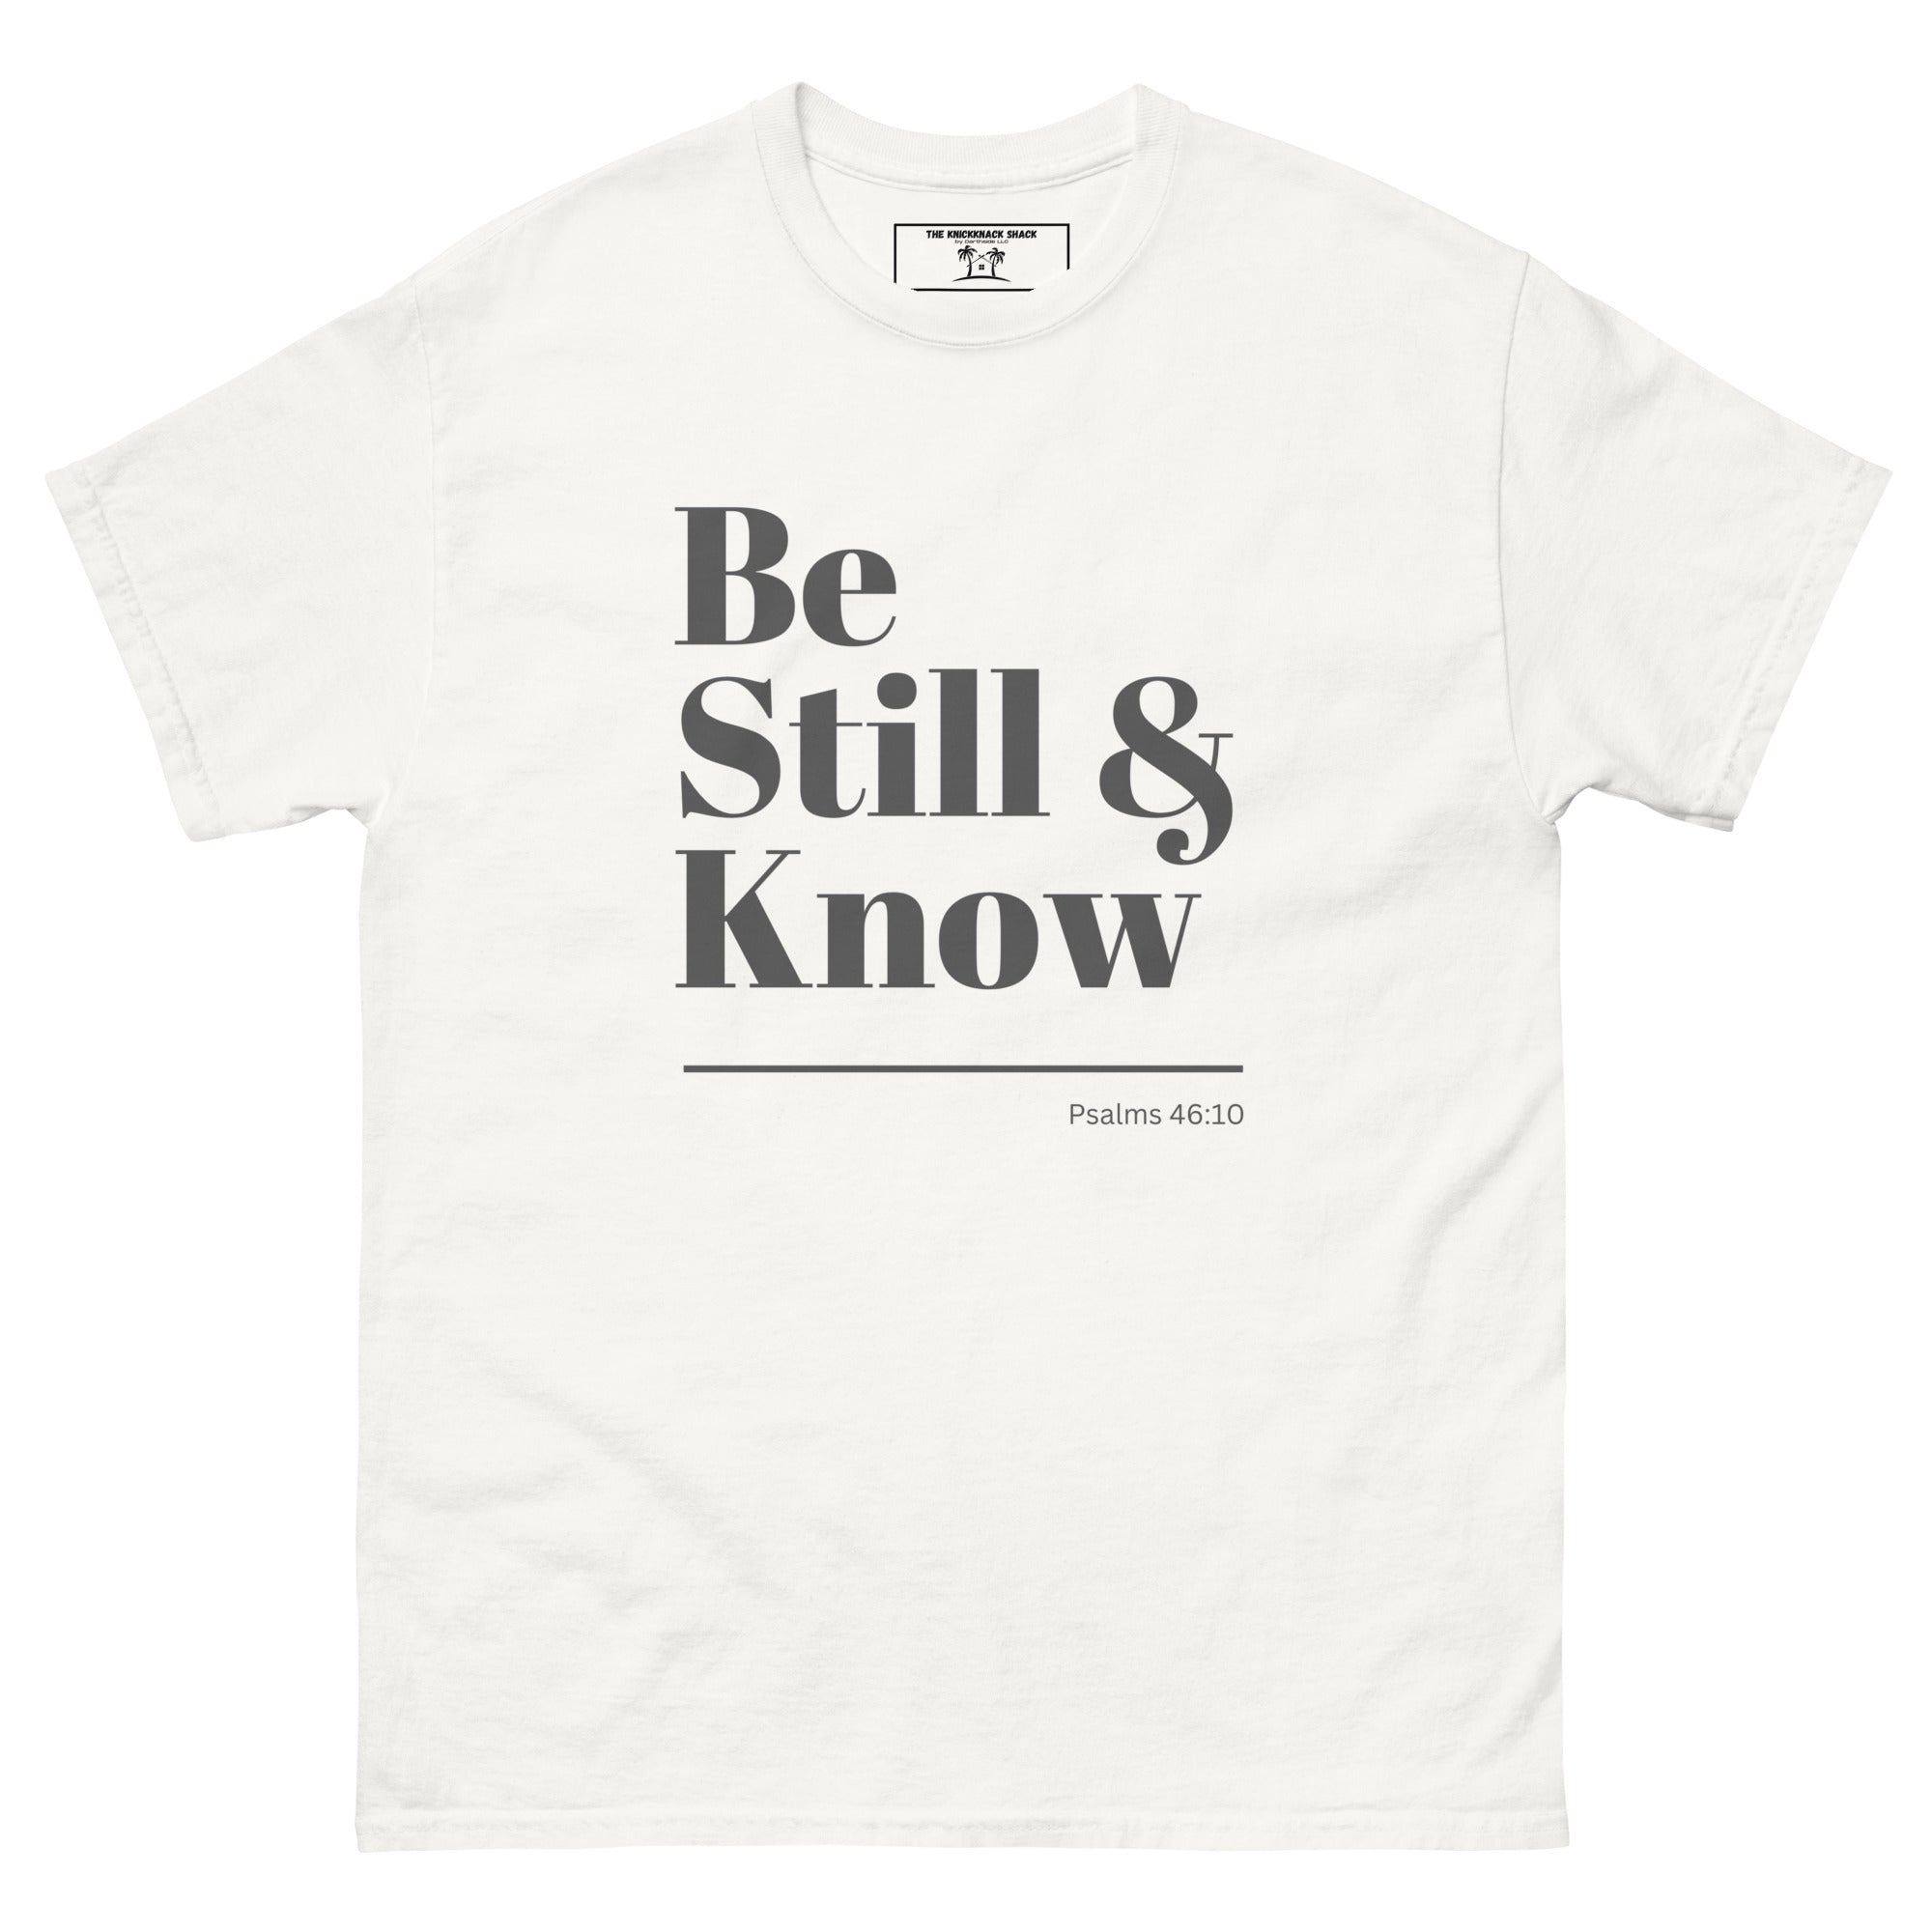 Classic Tee - Be Still & Know (Light Colors)